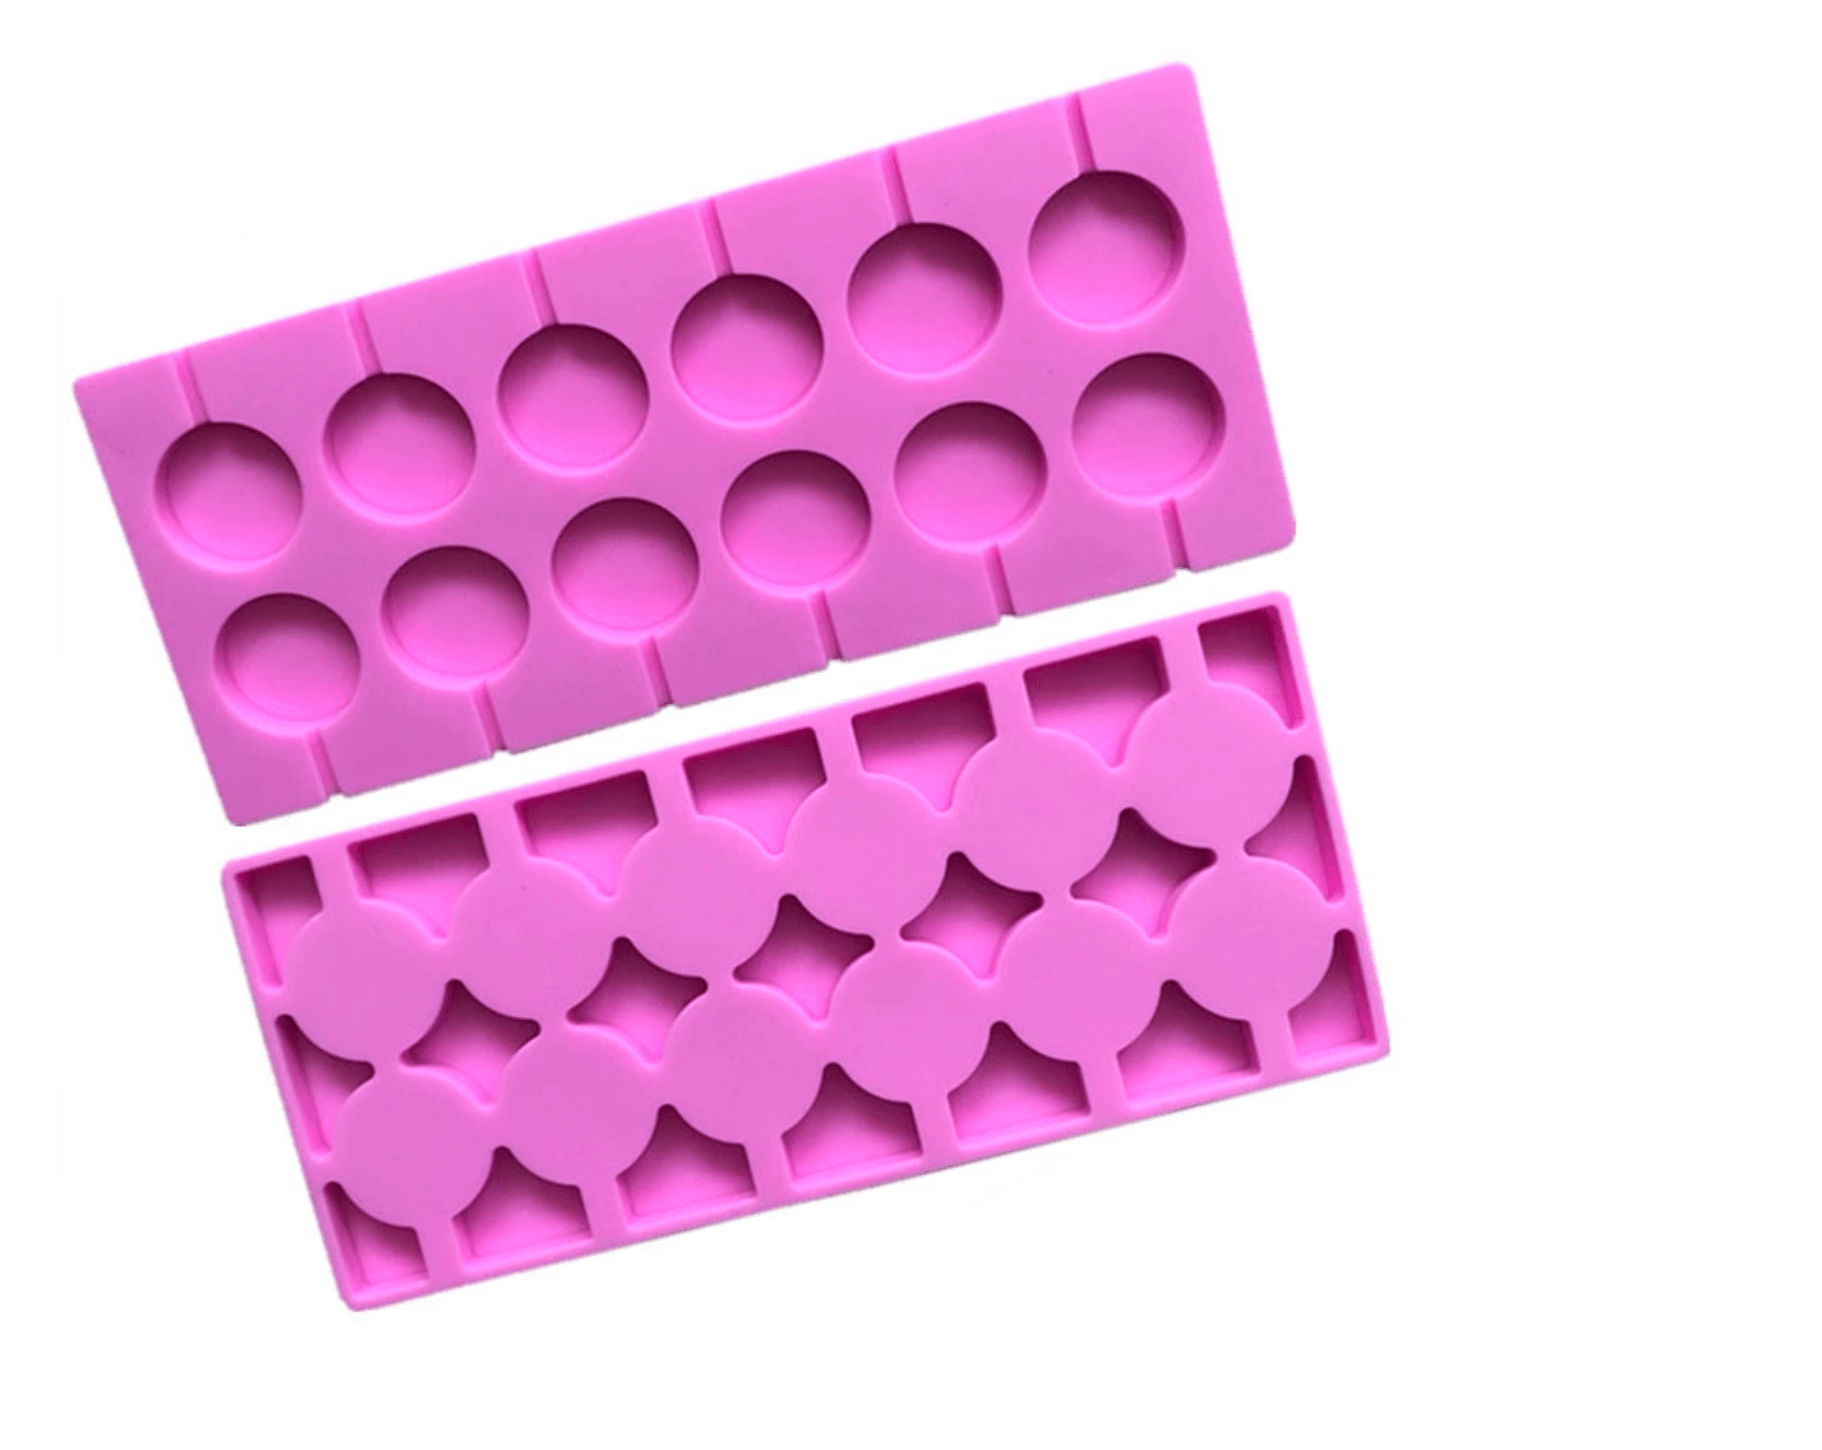 Small Round Cavity Silicone Mold for Lollipops - 12 Cavity 1.1" (2.8cm) each - BSUPP022.